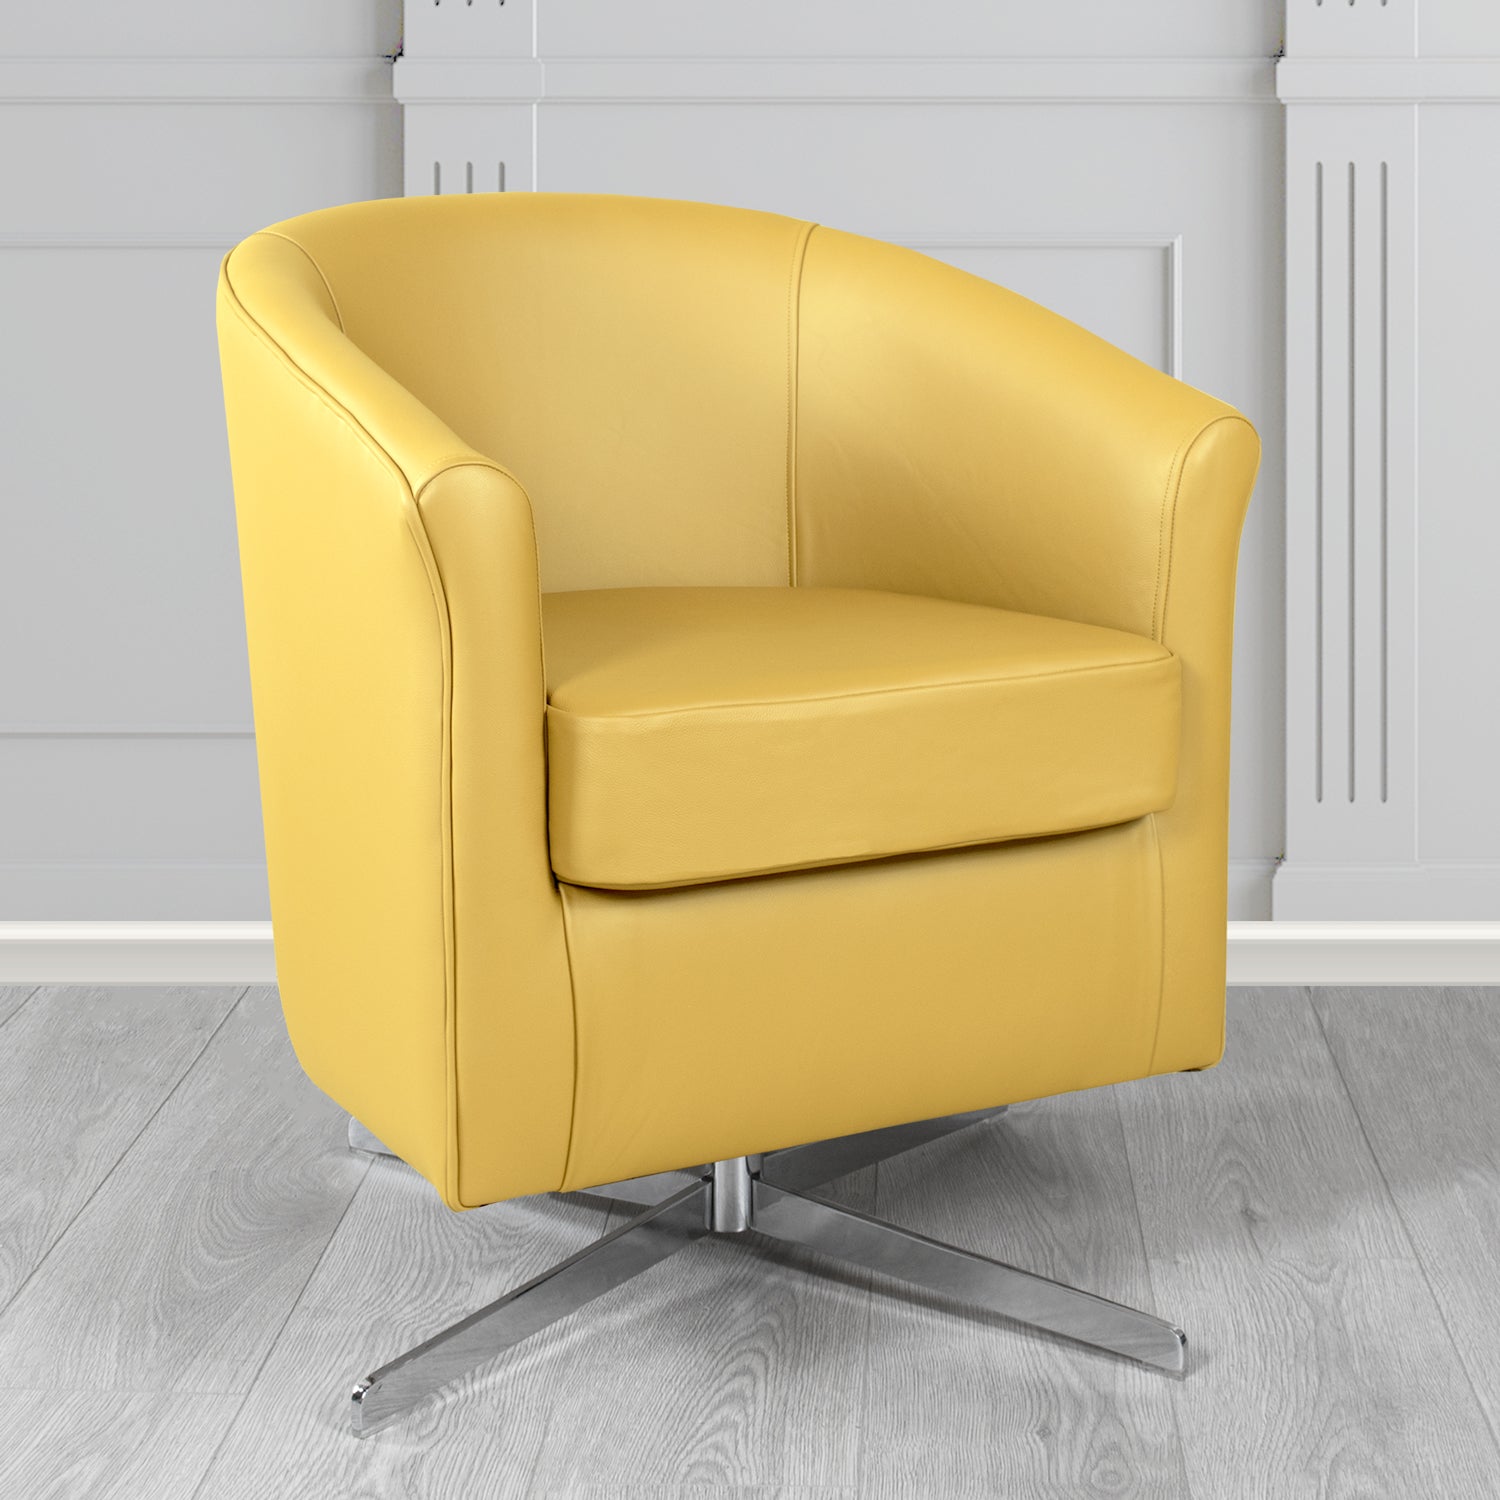 Cannes Swivel Tub Chair in Shelly Deluca Crib 5 Genuine Leather - The Tub Chair Shop